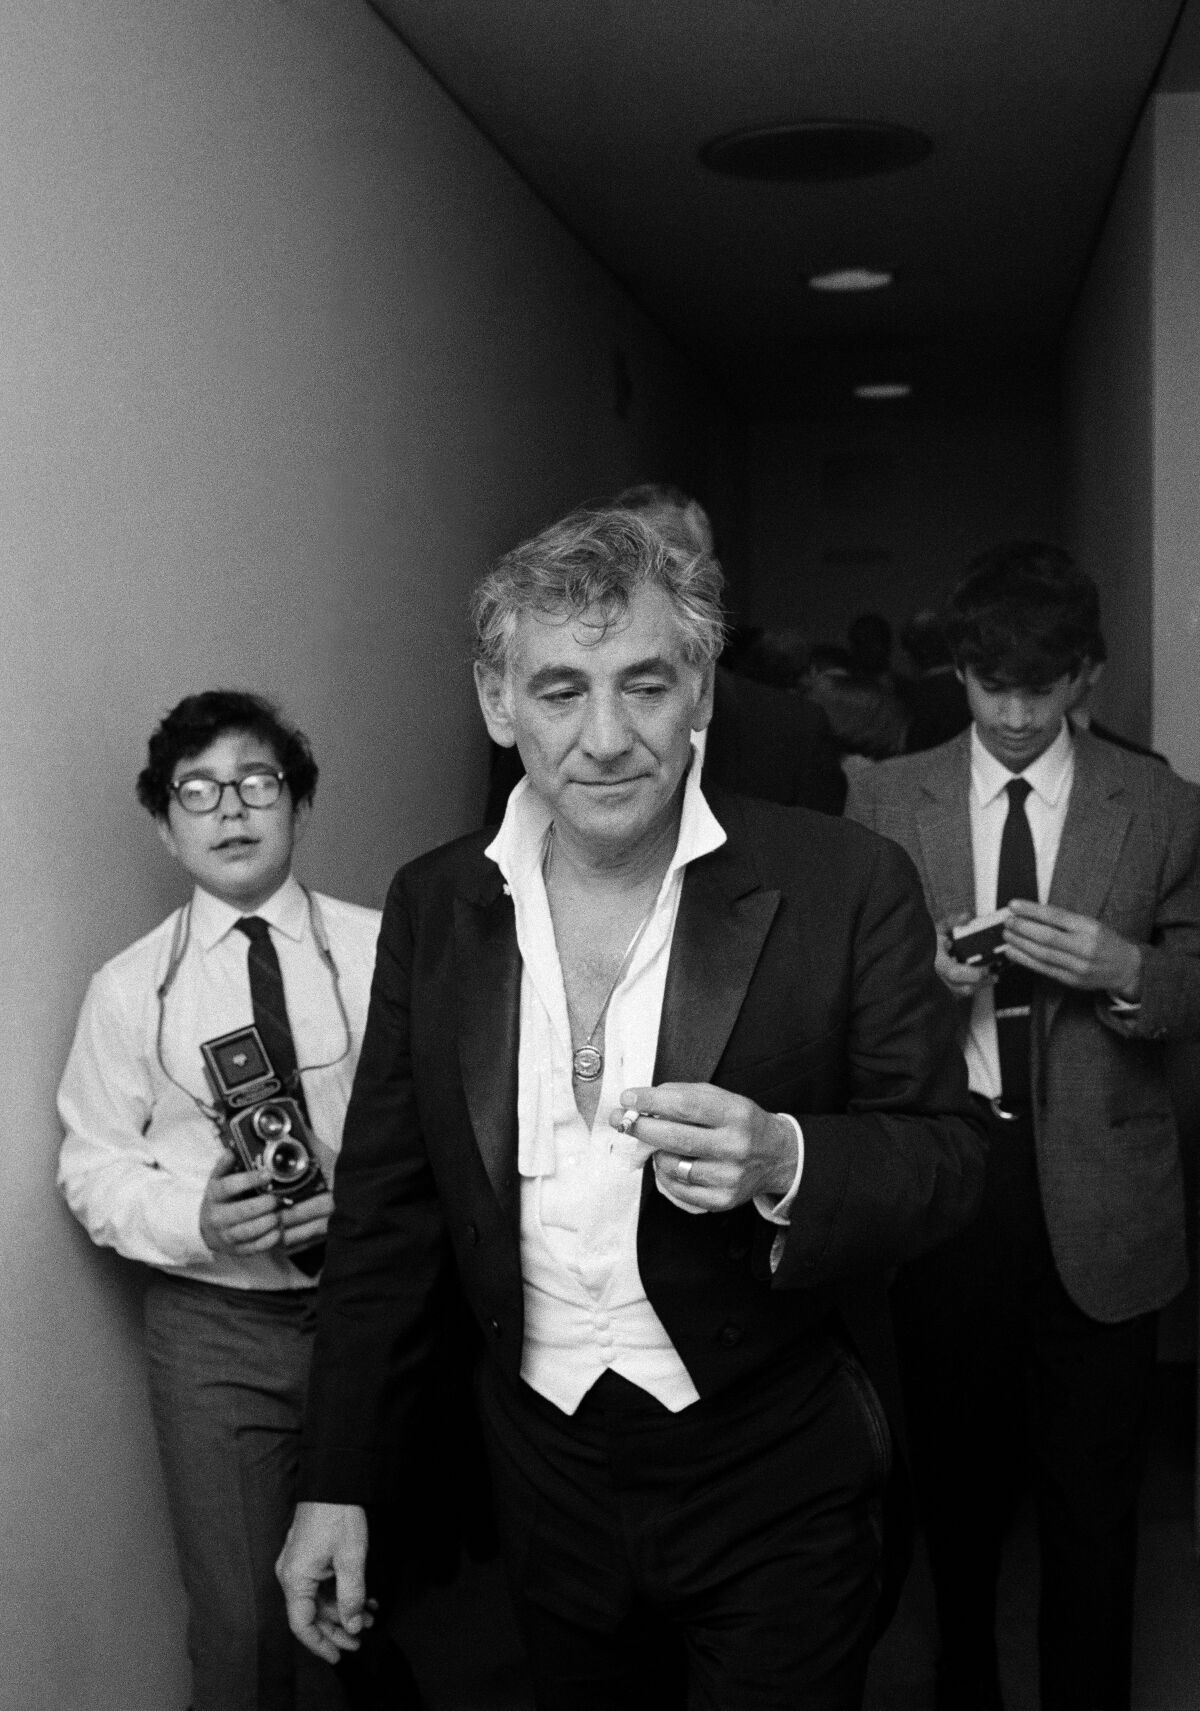 Leonard Bernstein after his last performance as music director of the New York Philharmonic on May 17, 1969.